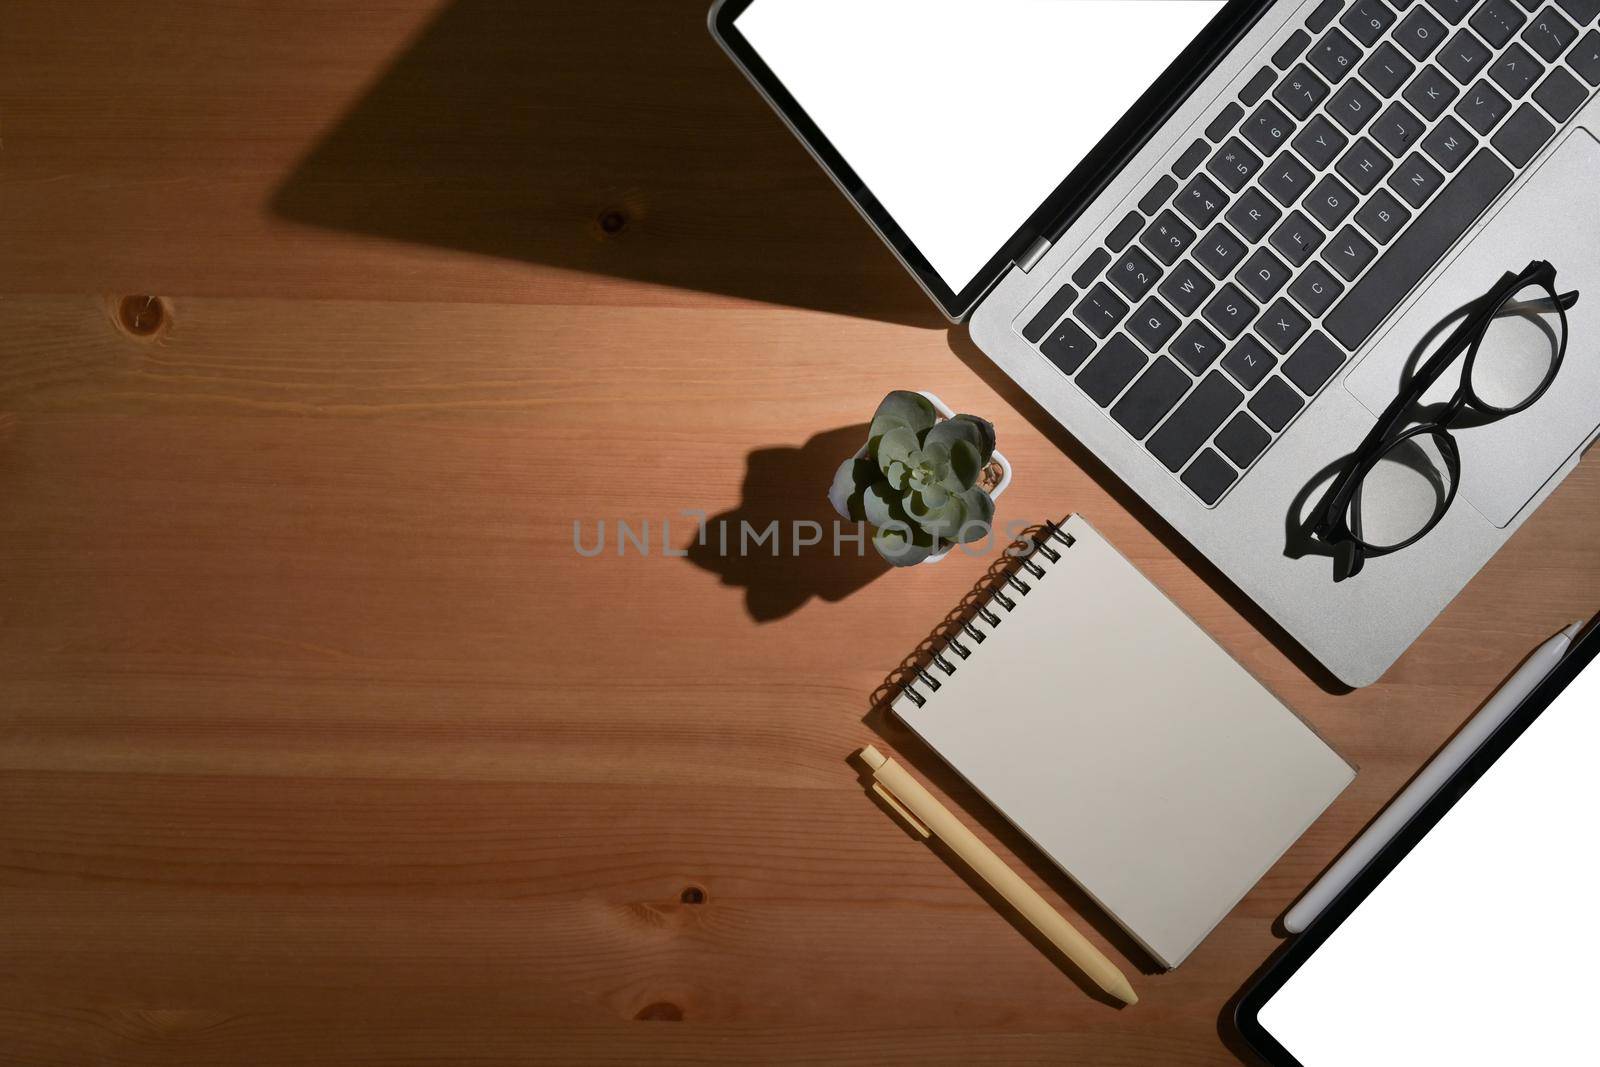 Top view computer laptop, digital tablet, notebook and succulent plant on wooden table. by prathanchorruangsak